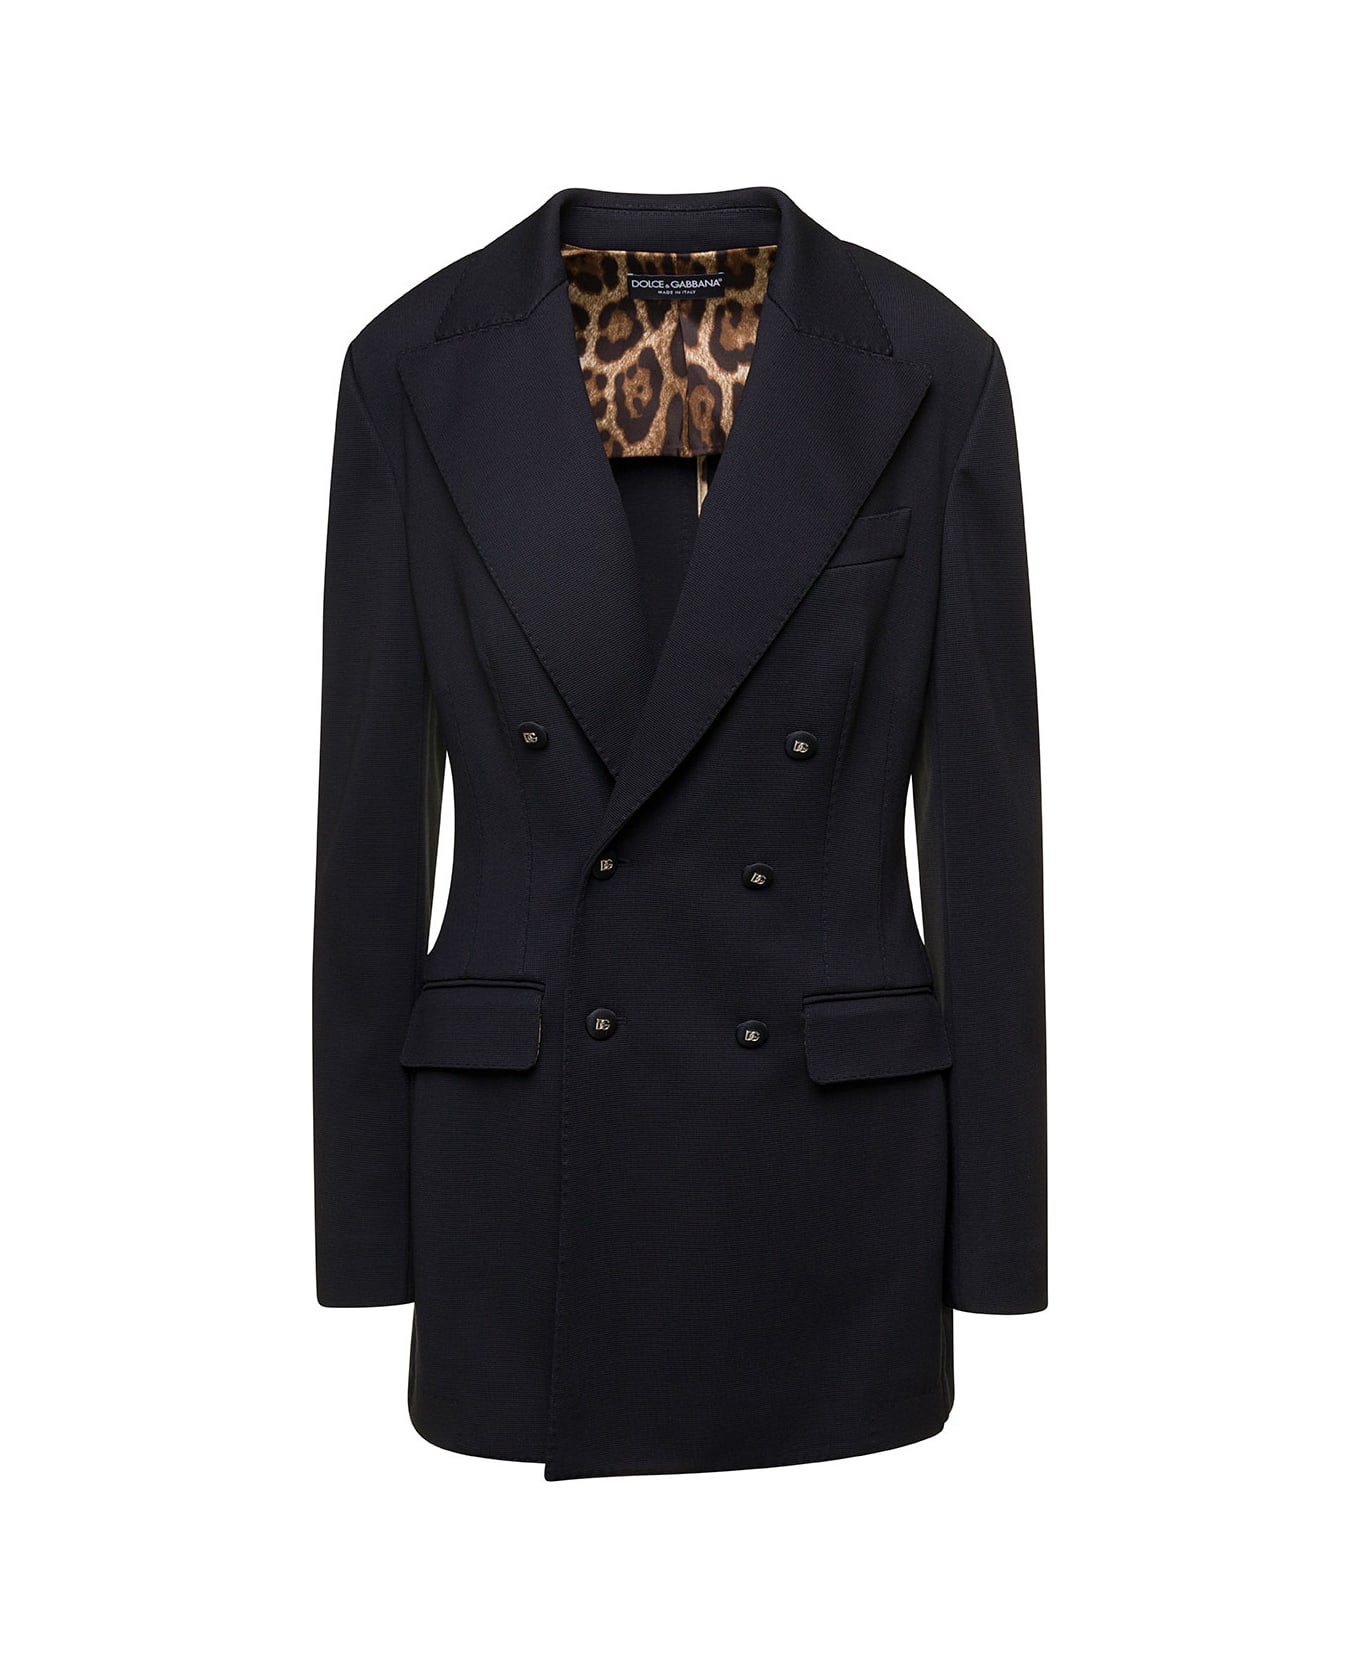 Dolce & Gabbana Black Double-breasted Jacket With Branded Covered Buttons In Viscose Blend Woman - Black